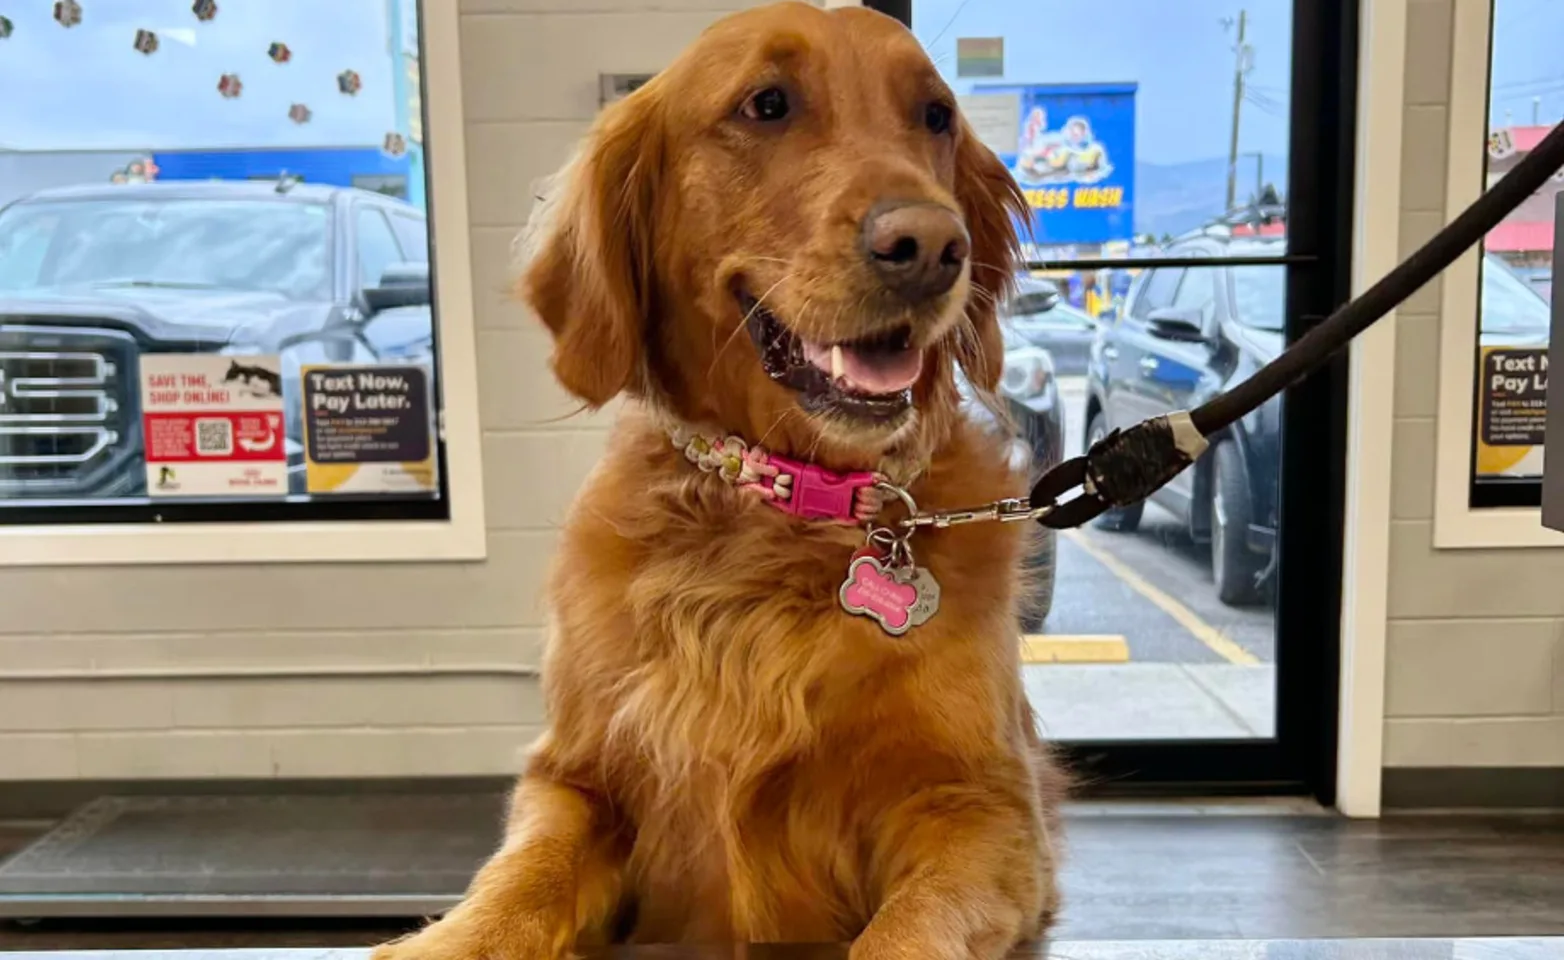 A Golden Retriever named Daisy with a pink collar on